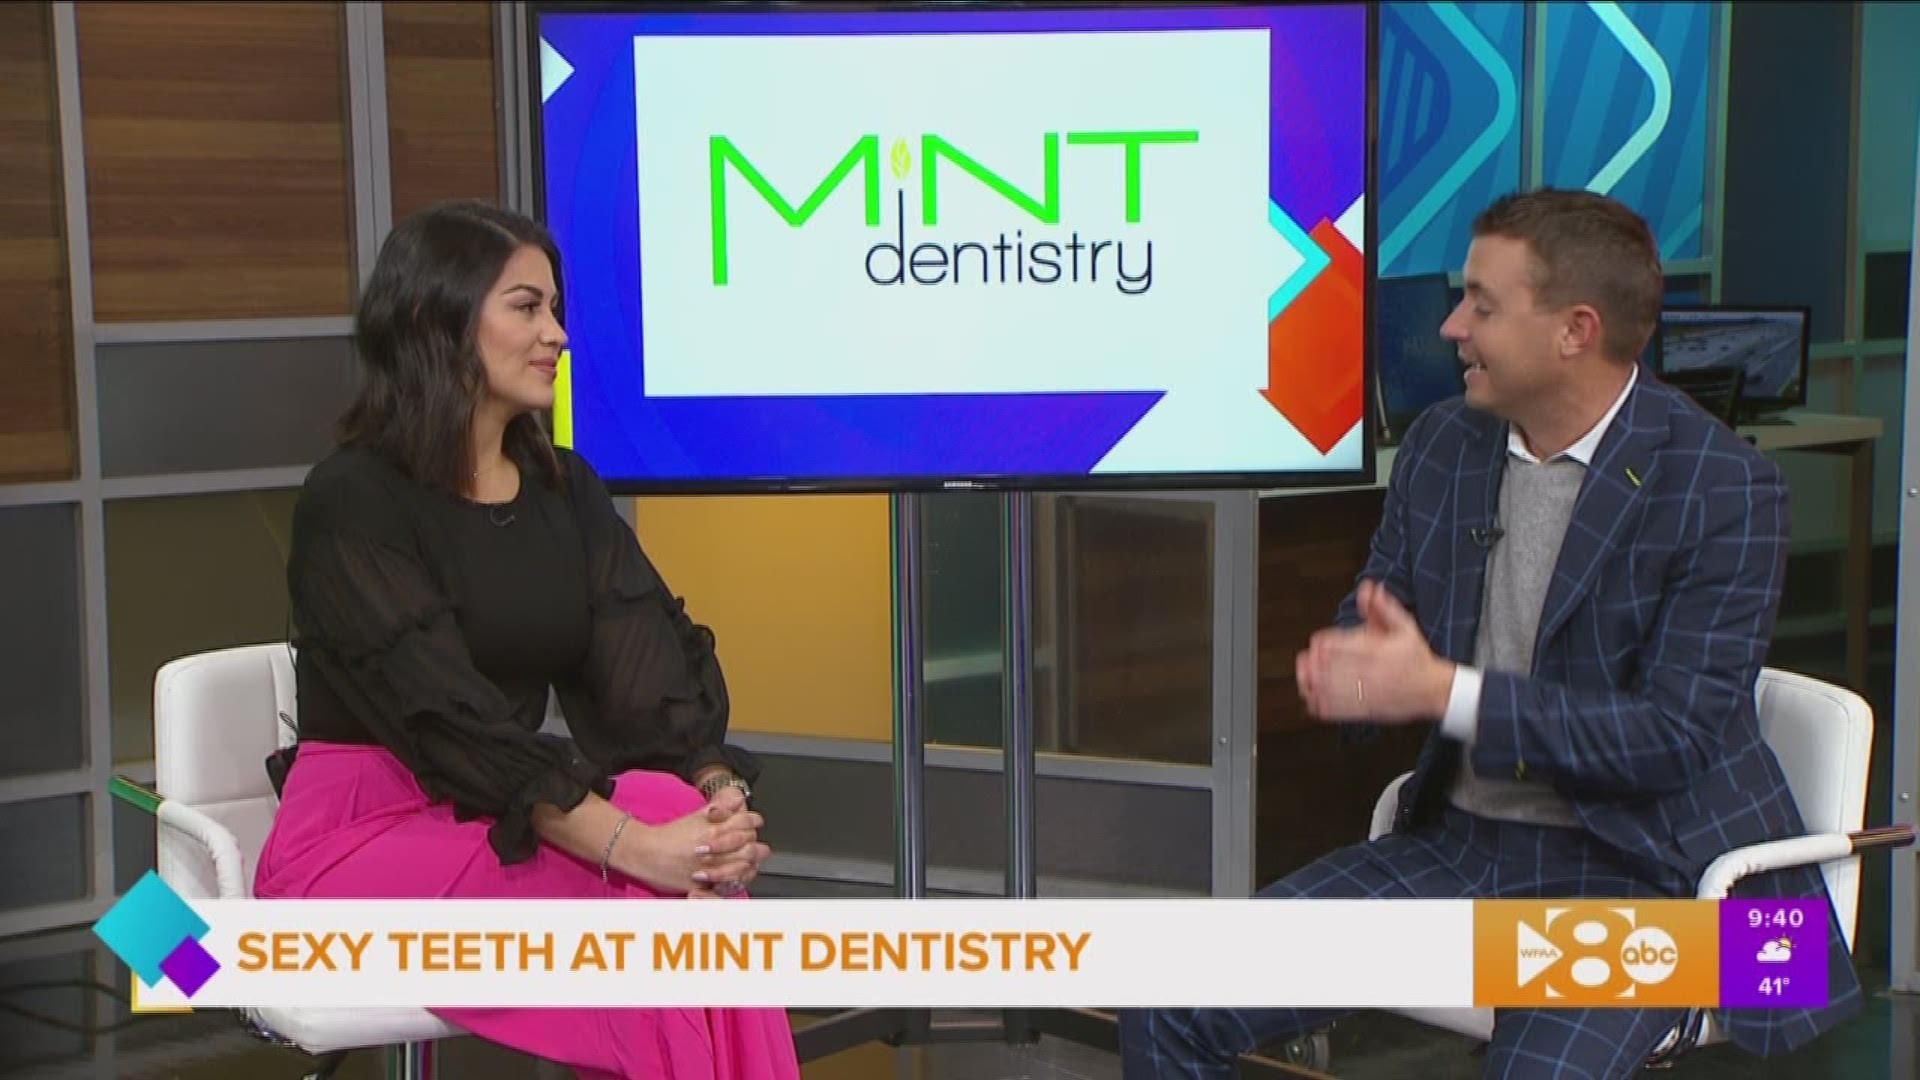 Call 214.821.6468 or visit mintdentistry.com for more information.